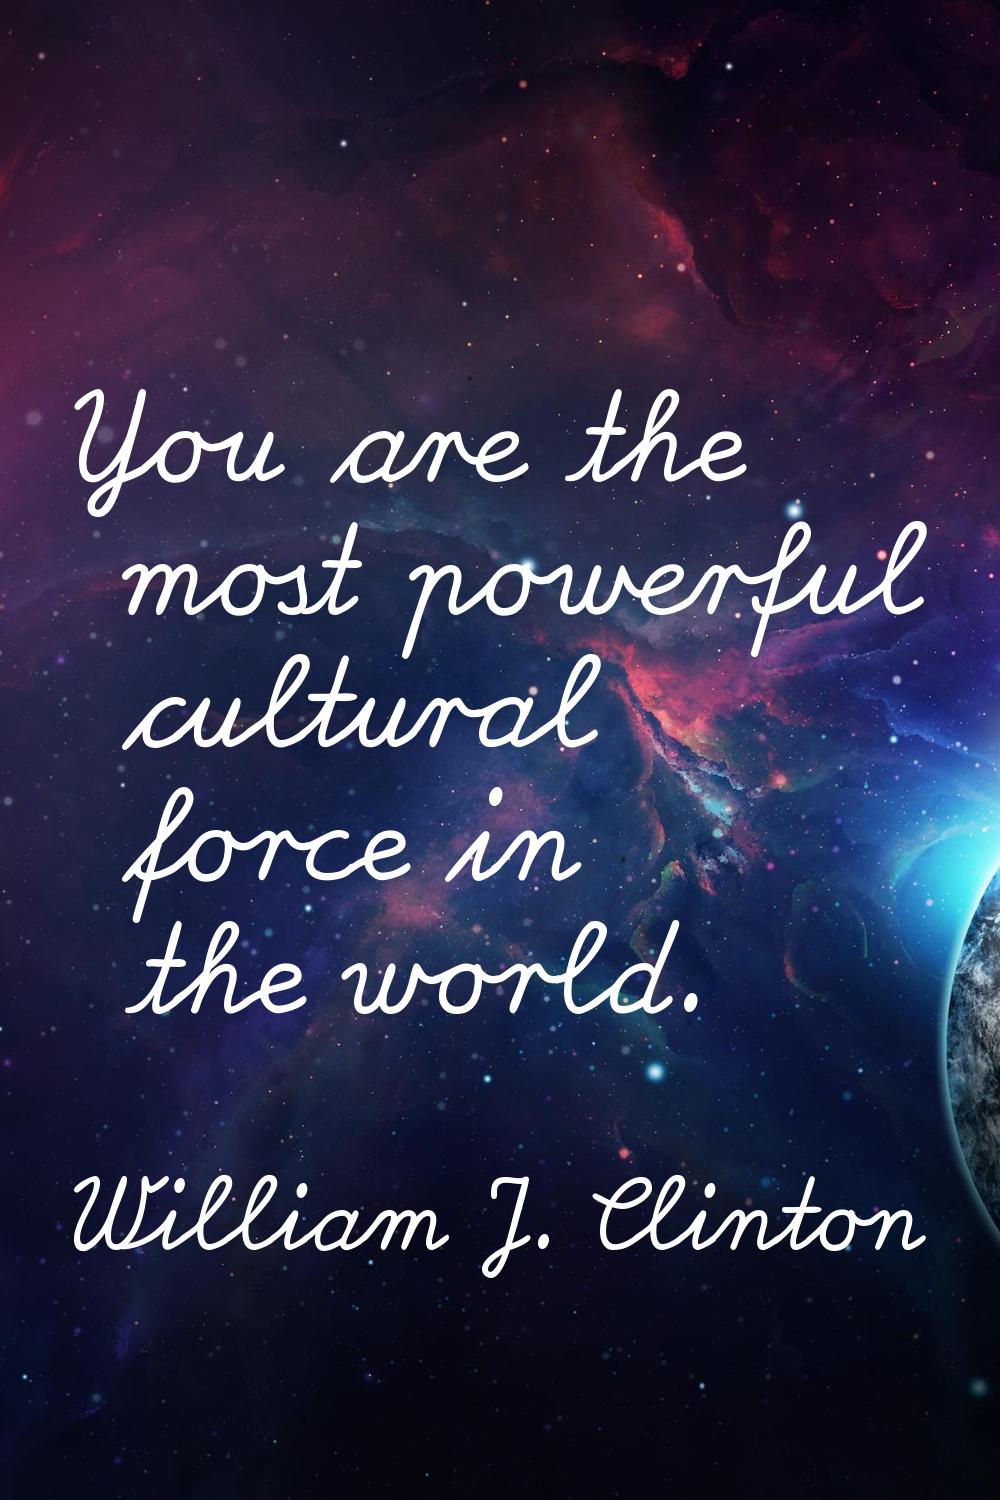 You are the most powerful cultural force in the world.